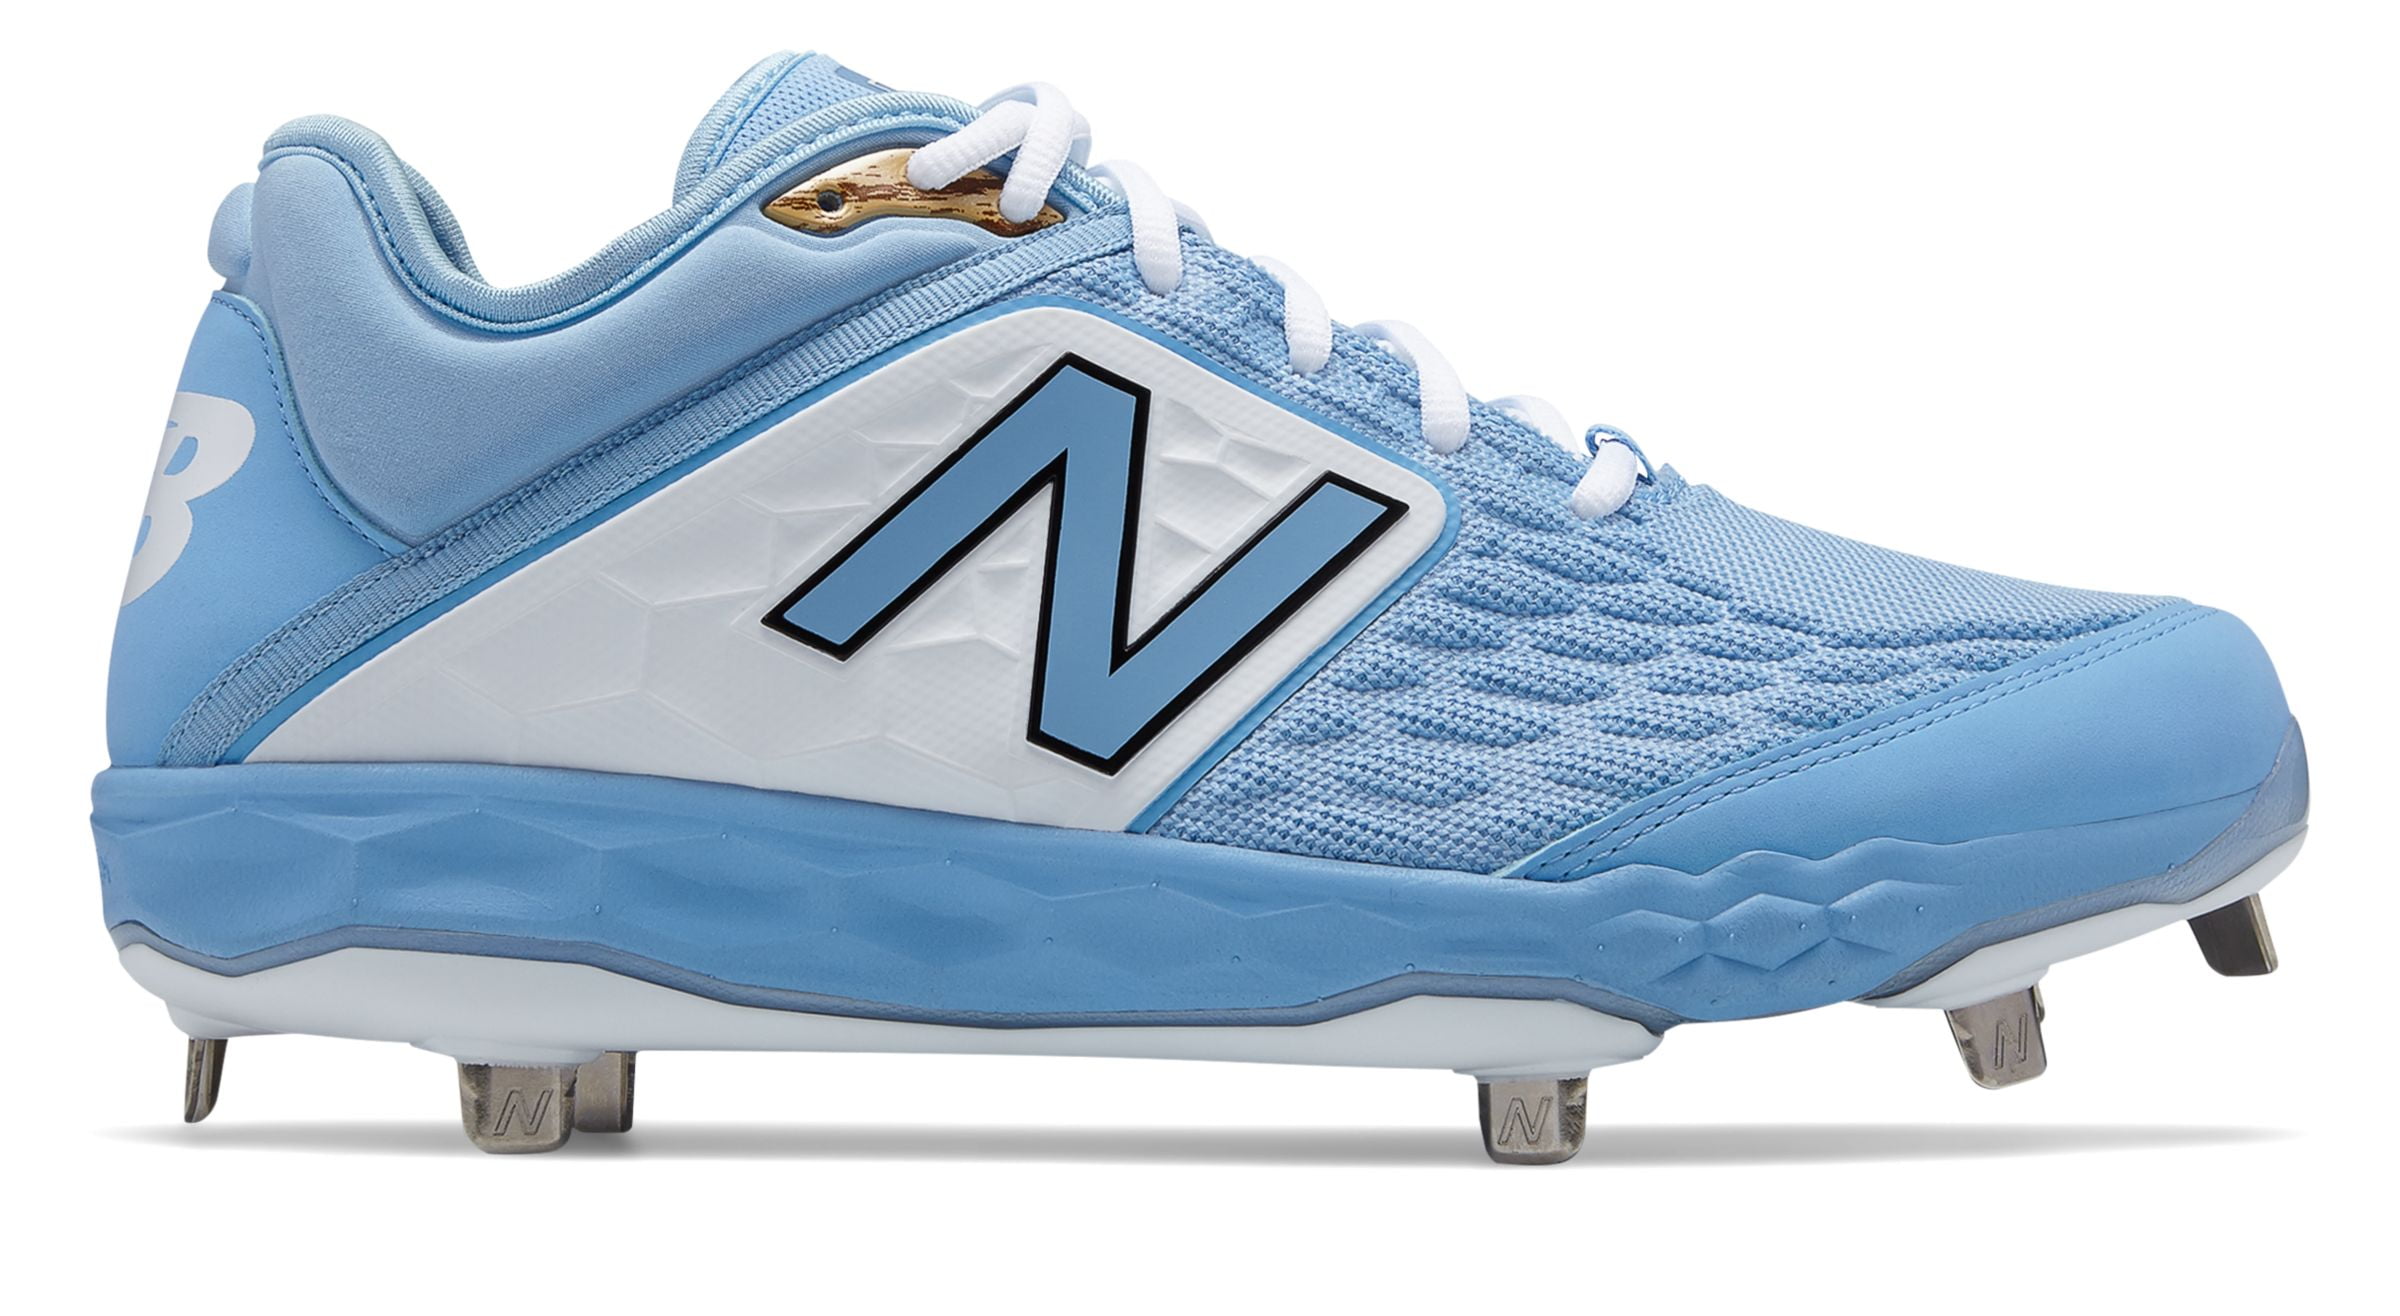 New Balance Low Cut 8v8 Metal Baseball Cleat Mens Shoes Blue with White